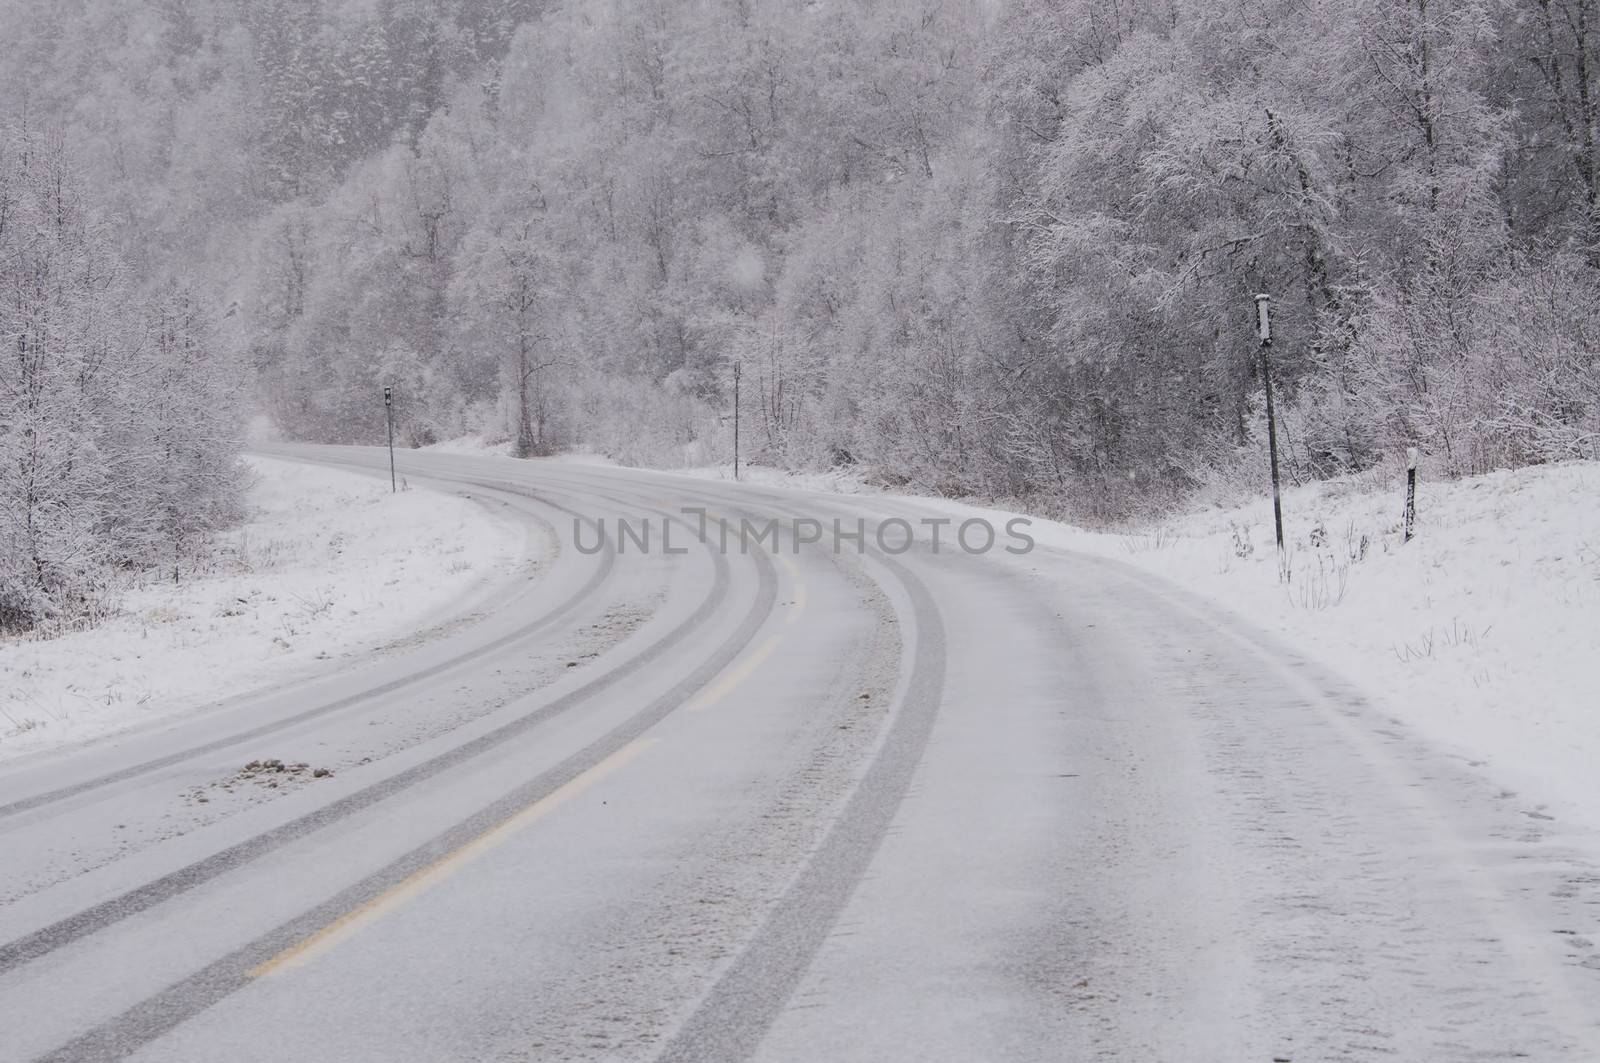 A snow covered road in the forest with visible snowflakes